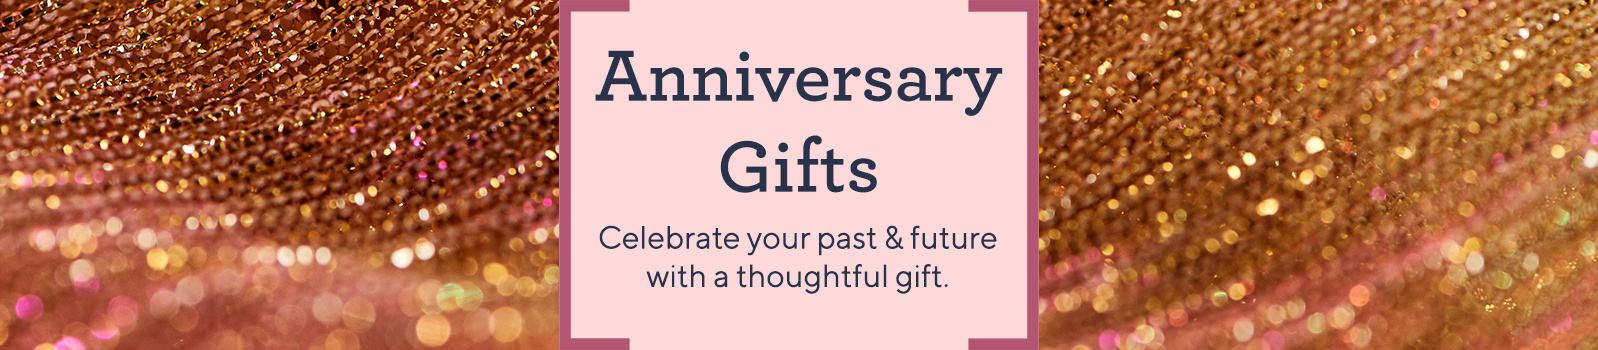 Anniversary Gifts — Celebrate your past & future with a thoughtful gift